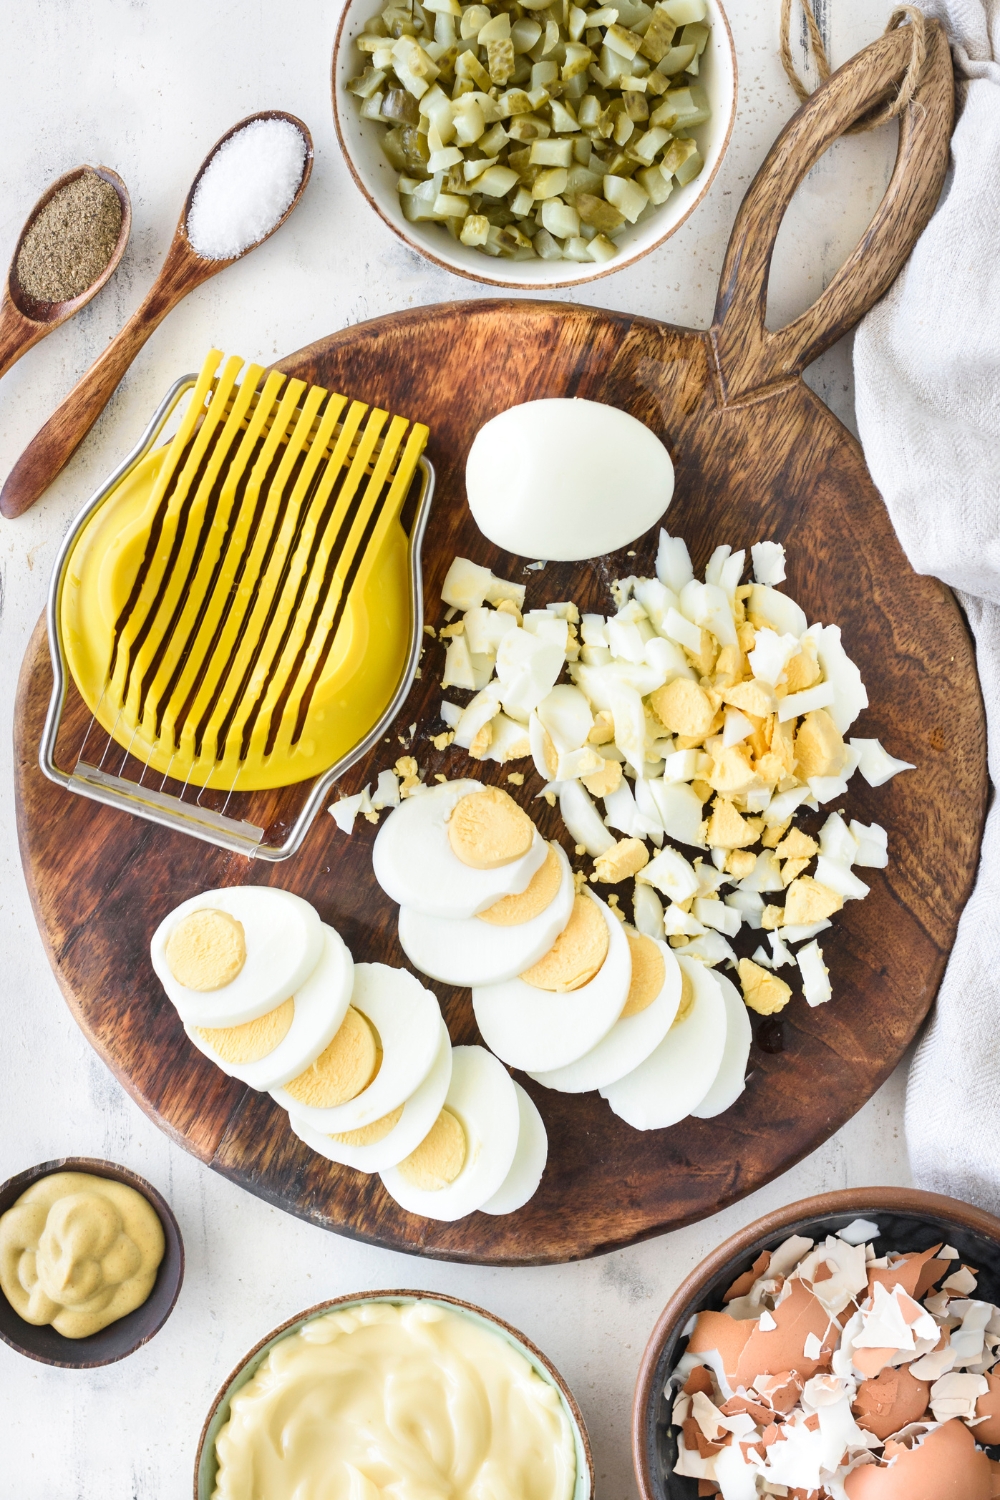 Hard-boiled eggs that have been sliced and chopped using an egg slicer that is on the wooden board next to the eggs.